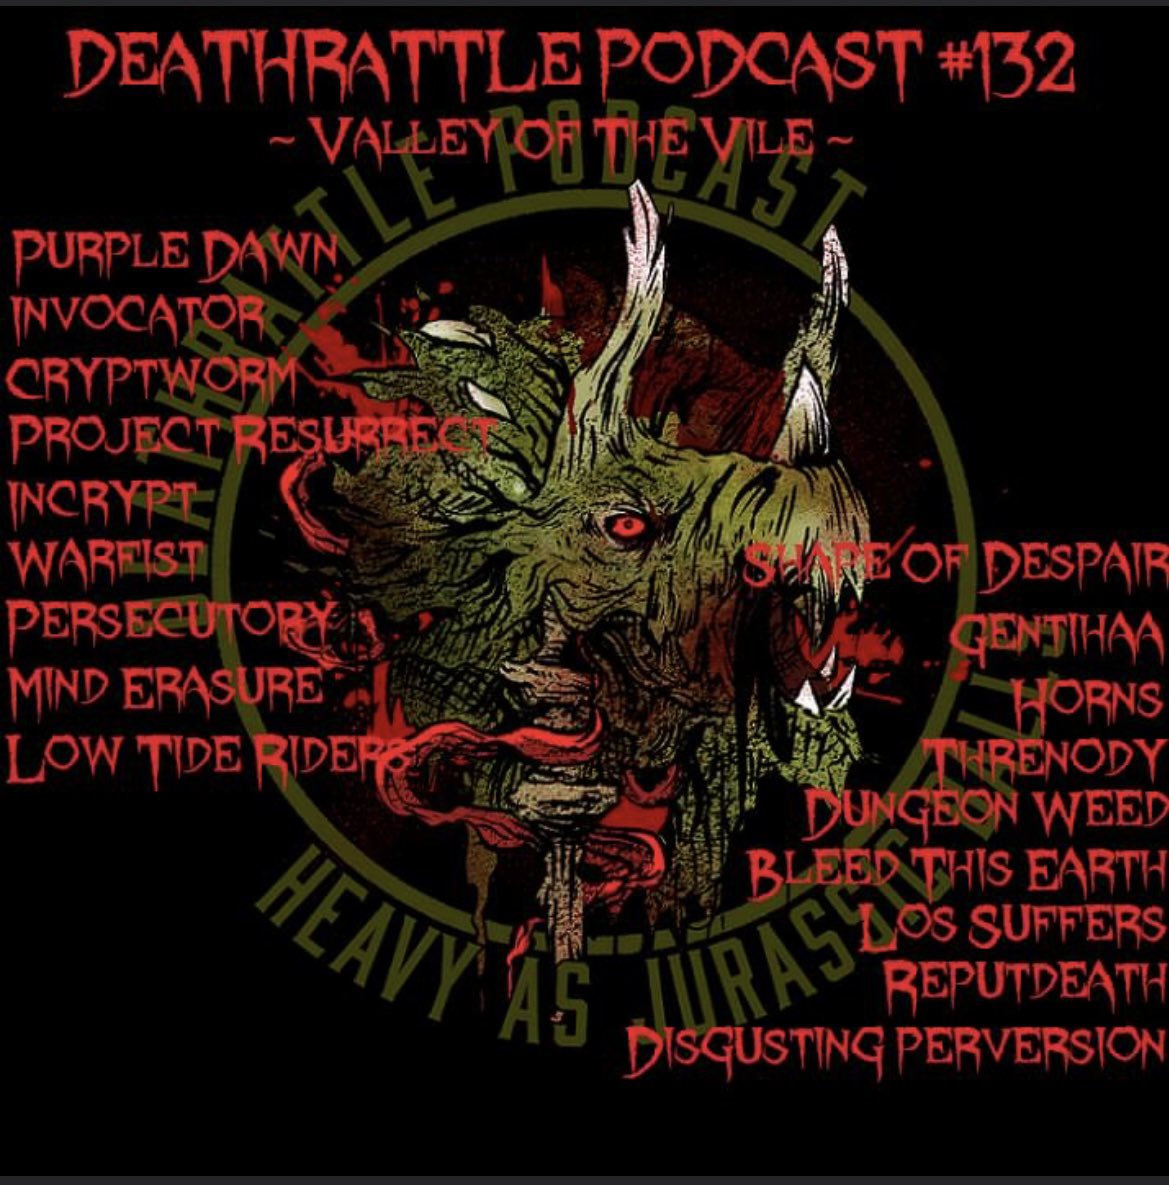 Check out full podcast now🤘🏻 #deathmetalband #metalband #deathmetal #metalmusicfans #osdm #newalbum #podcast #supportlocalartists #newmusic 

podomatic.com/podcasts/swood…